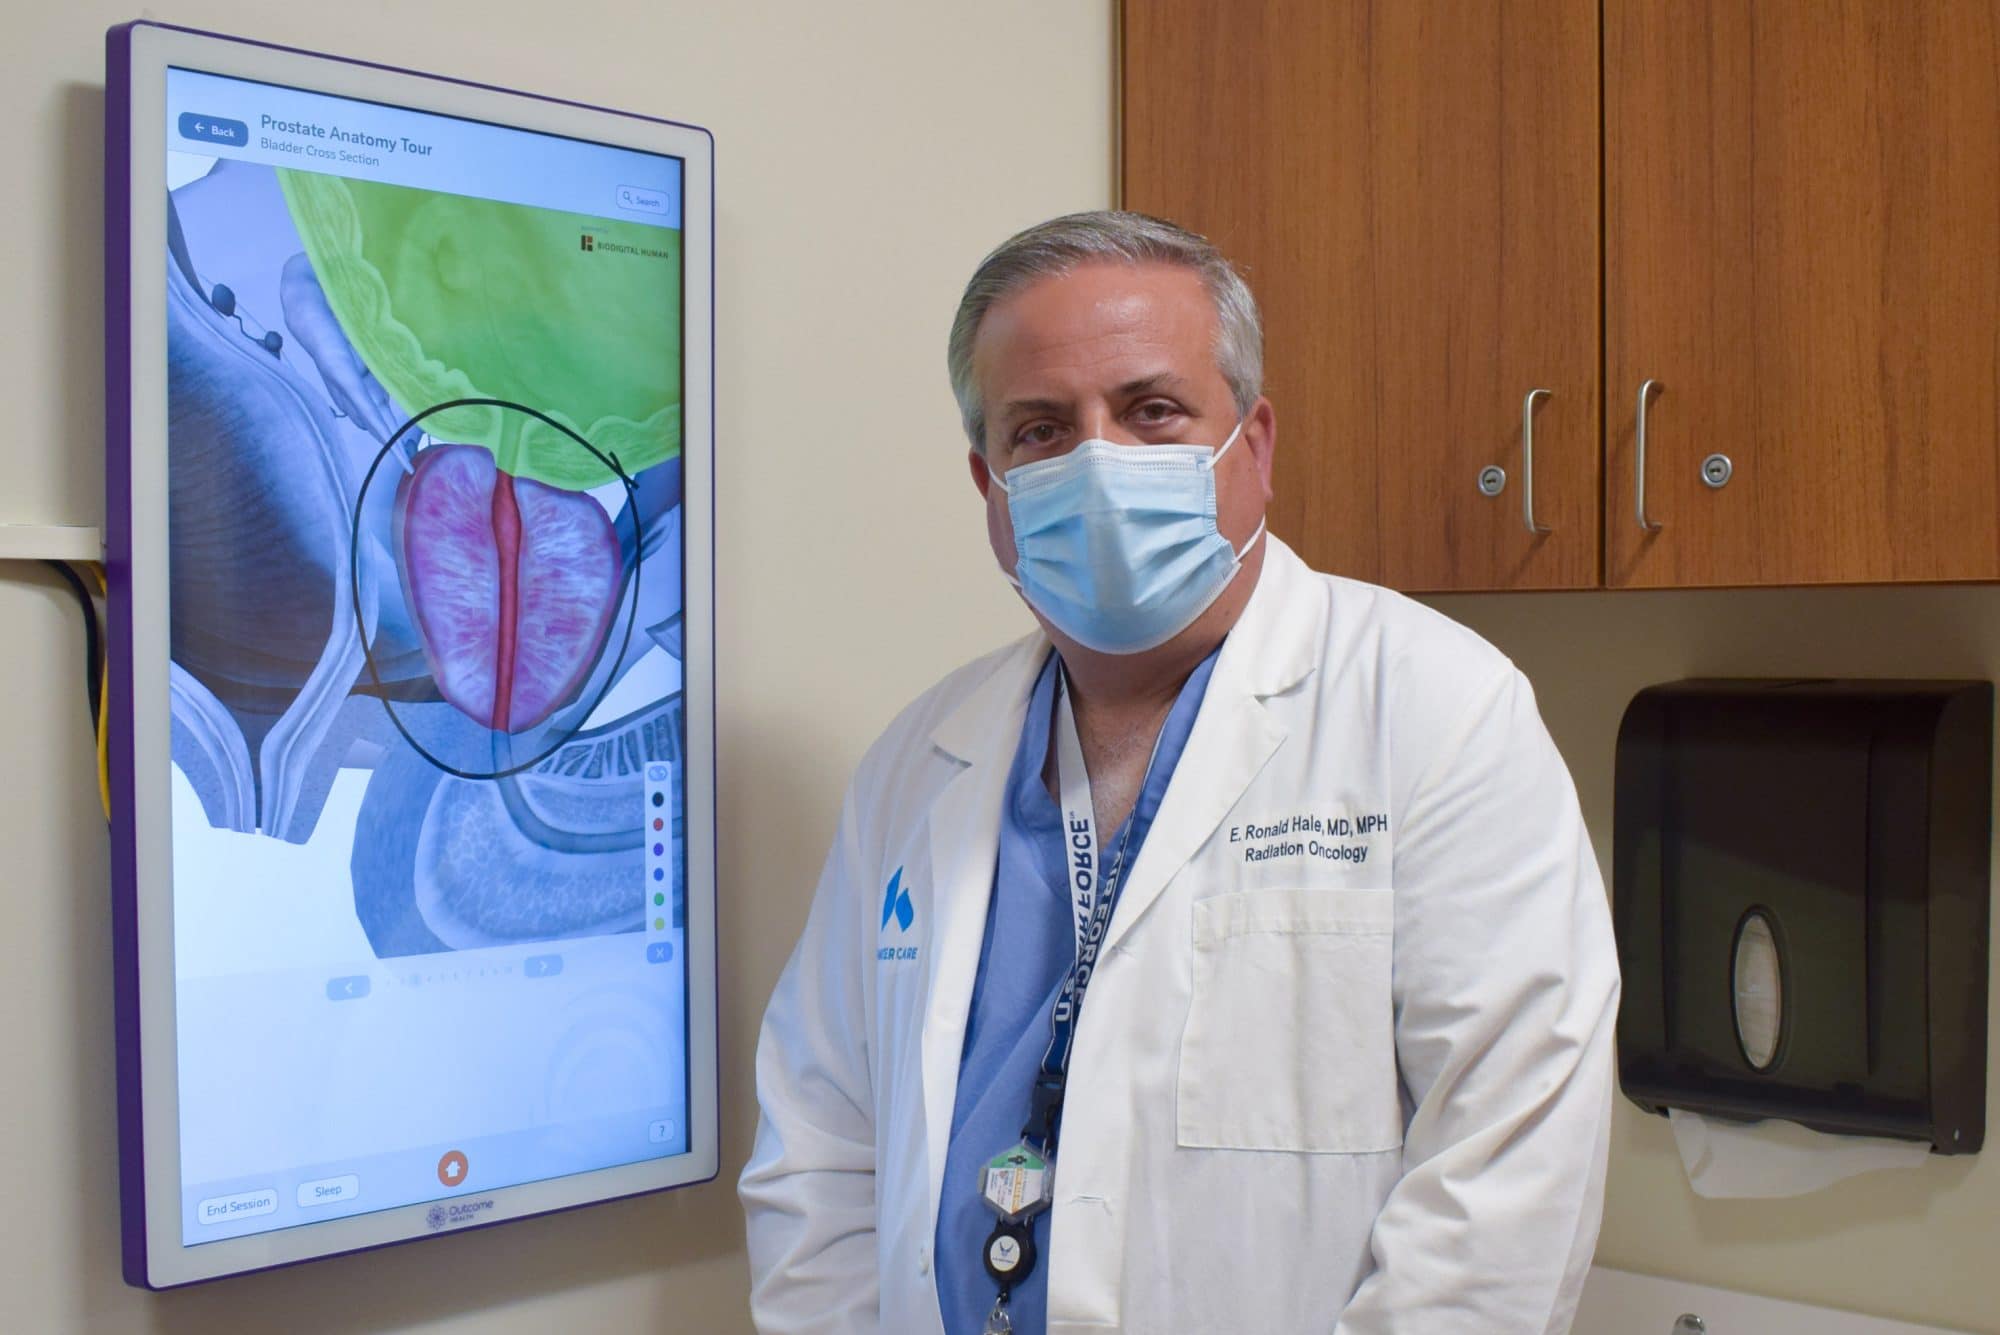 Dr. Hale standing at screen showing prostate